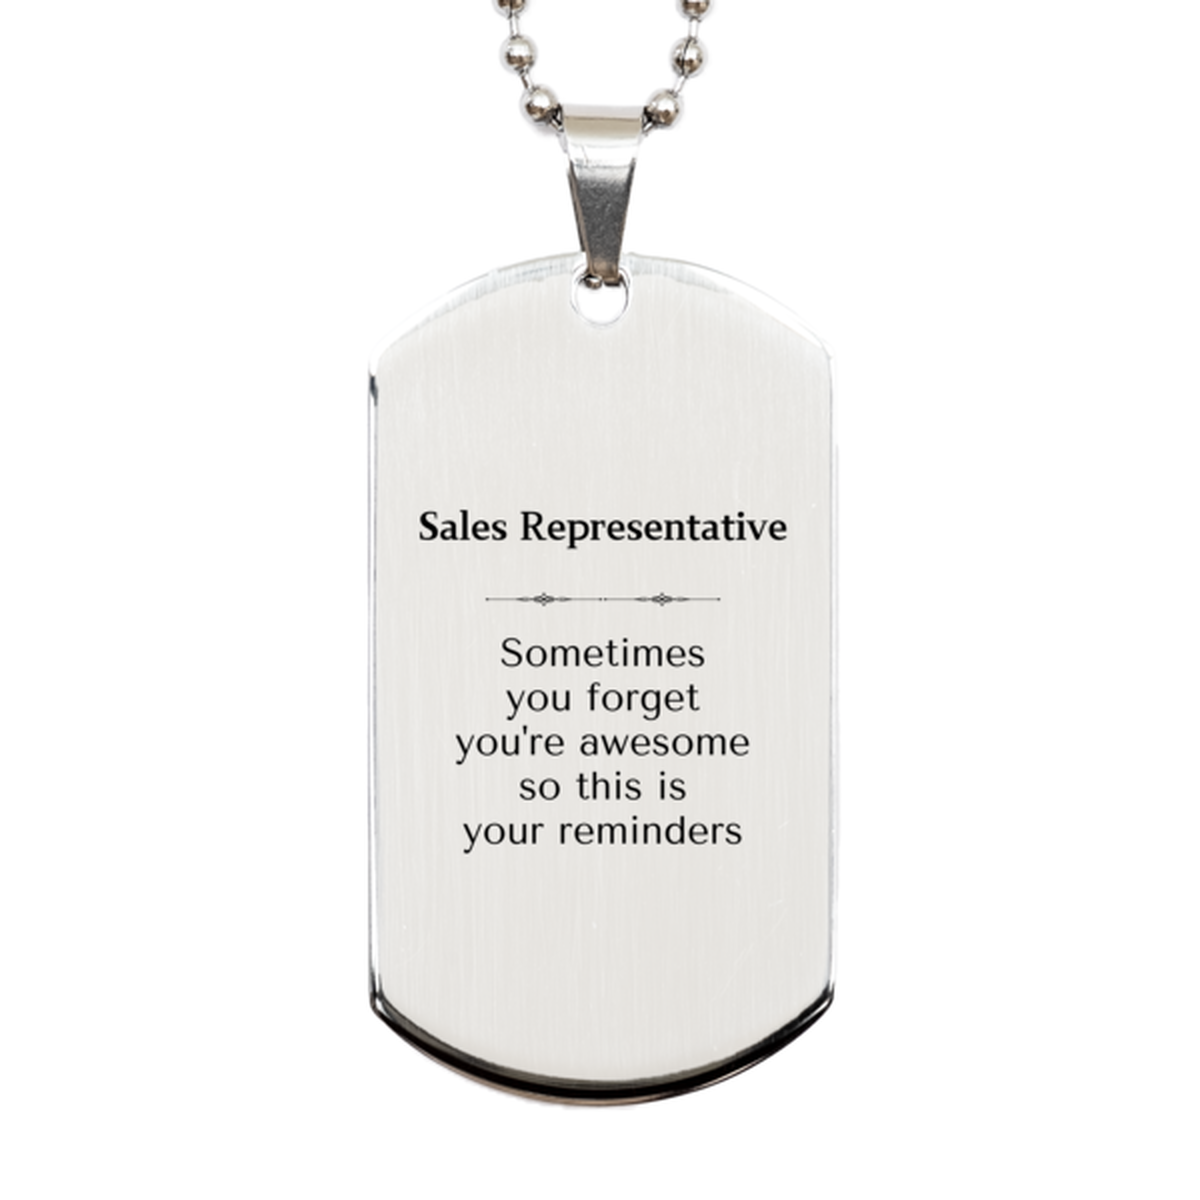 Sentimental Sales Representative Silver Dog Tag, Sales Representative Sometimes you forget you're awesome so this is your reminders, Graduation Christmas Birthday Gifts for Sales Representative, Men, Women, Coworkers